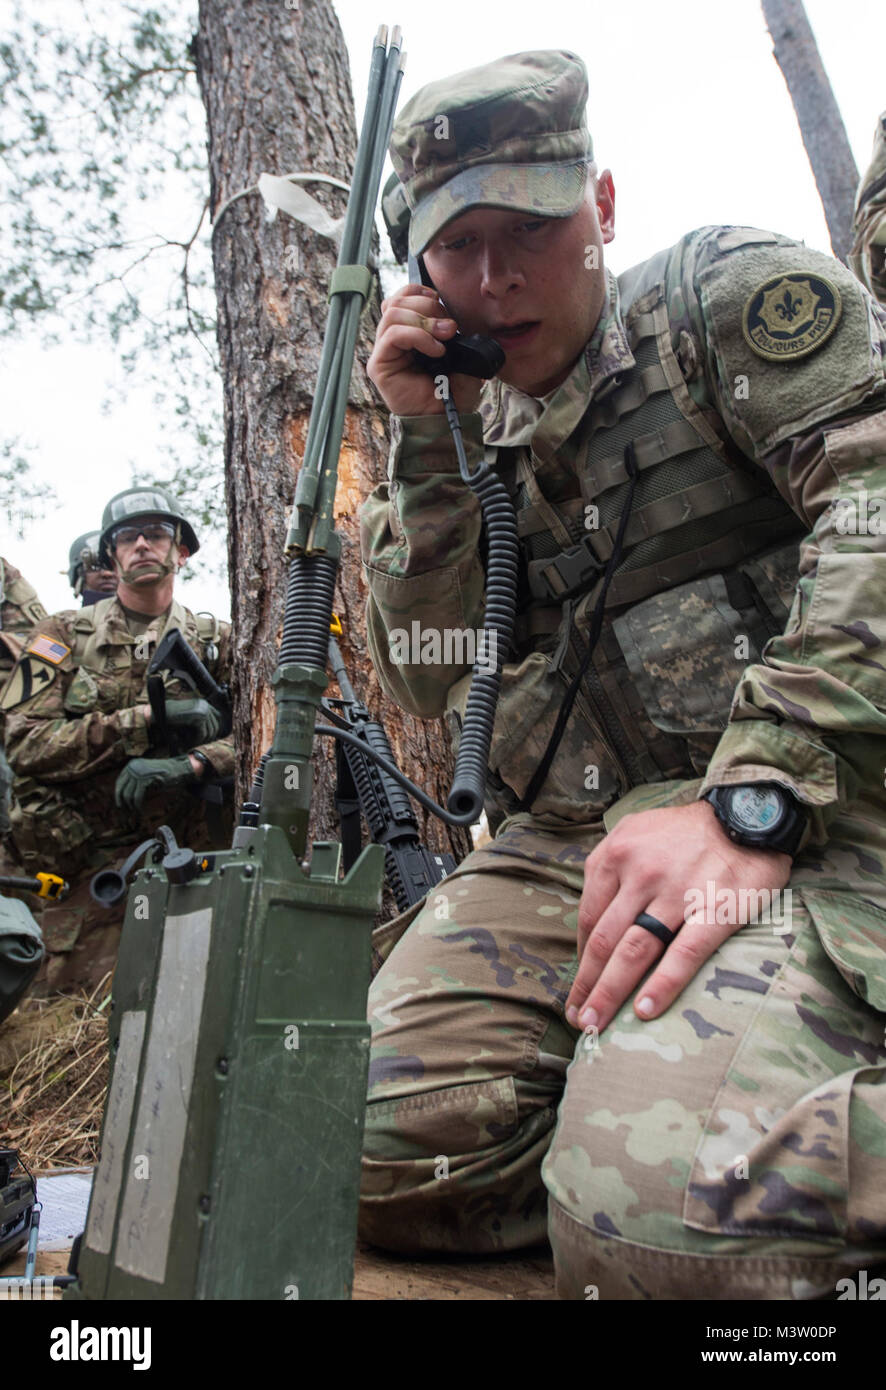 GRAFENWOEHR, Germany – U.S. Army Sergeant Ryne Johnson makes radio  communication with a RT15 23 radio during the demonstration portion of a U.S.  Army Europe Expert Field Medical Badge evaluation in Grafenwoehr,